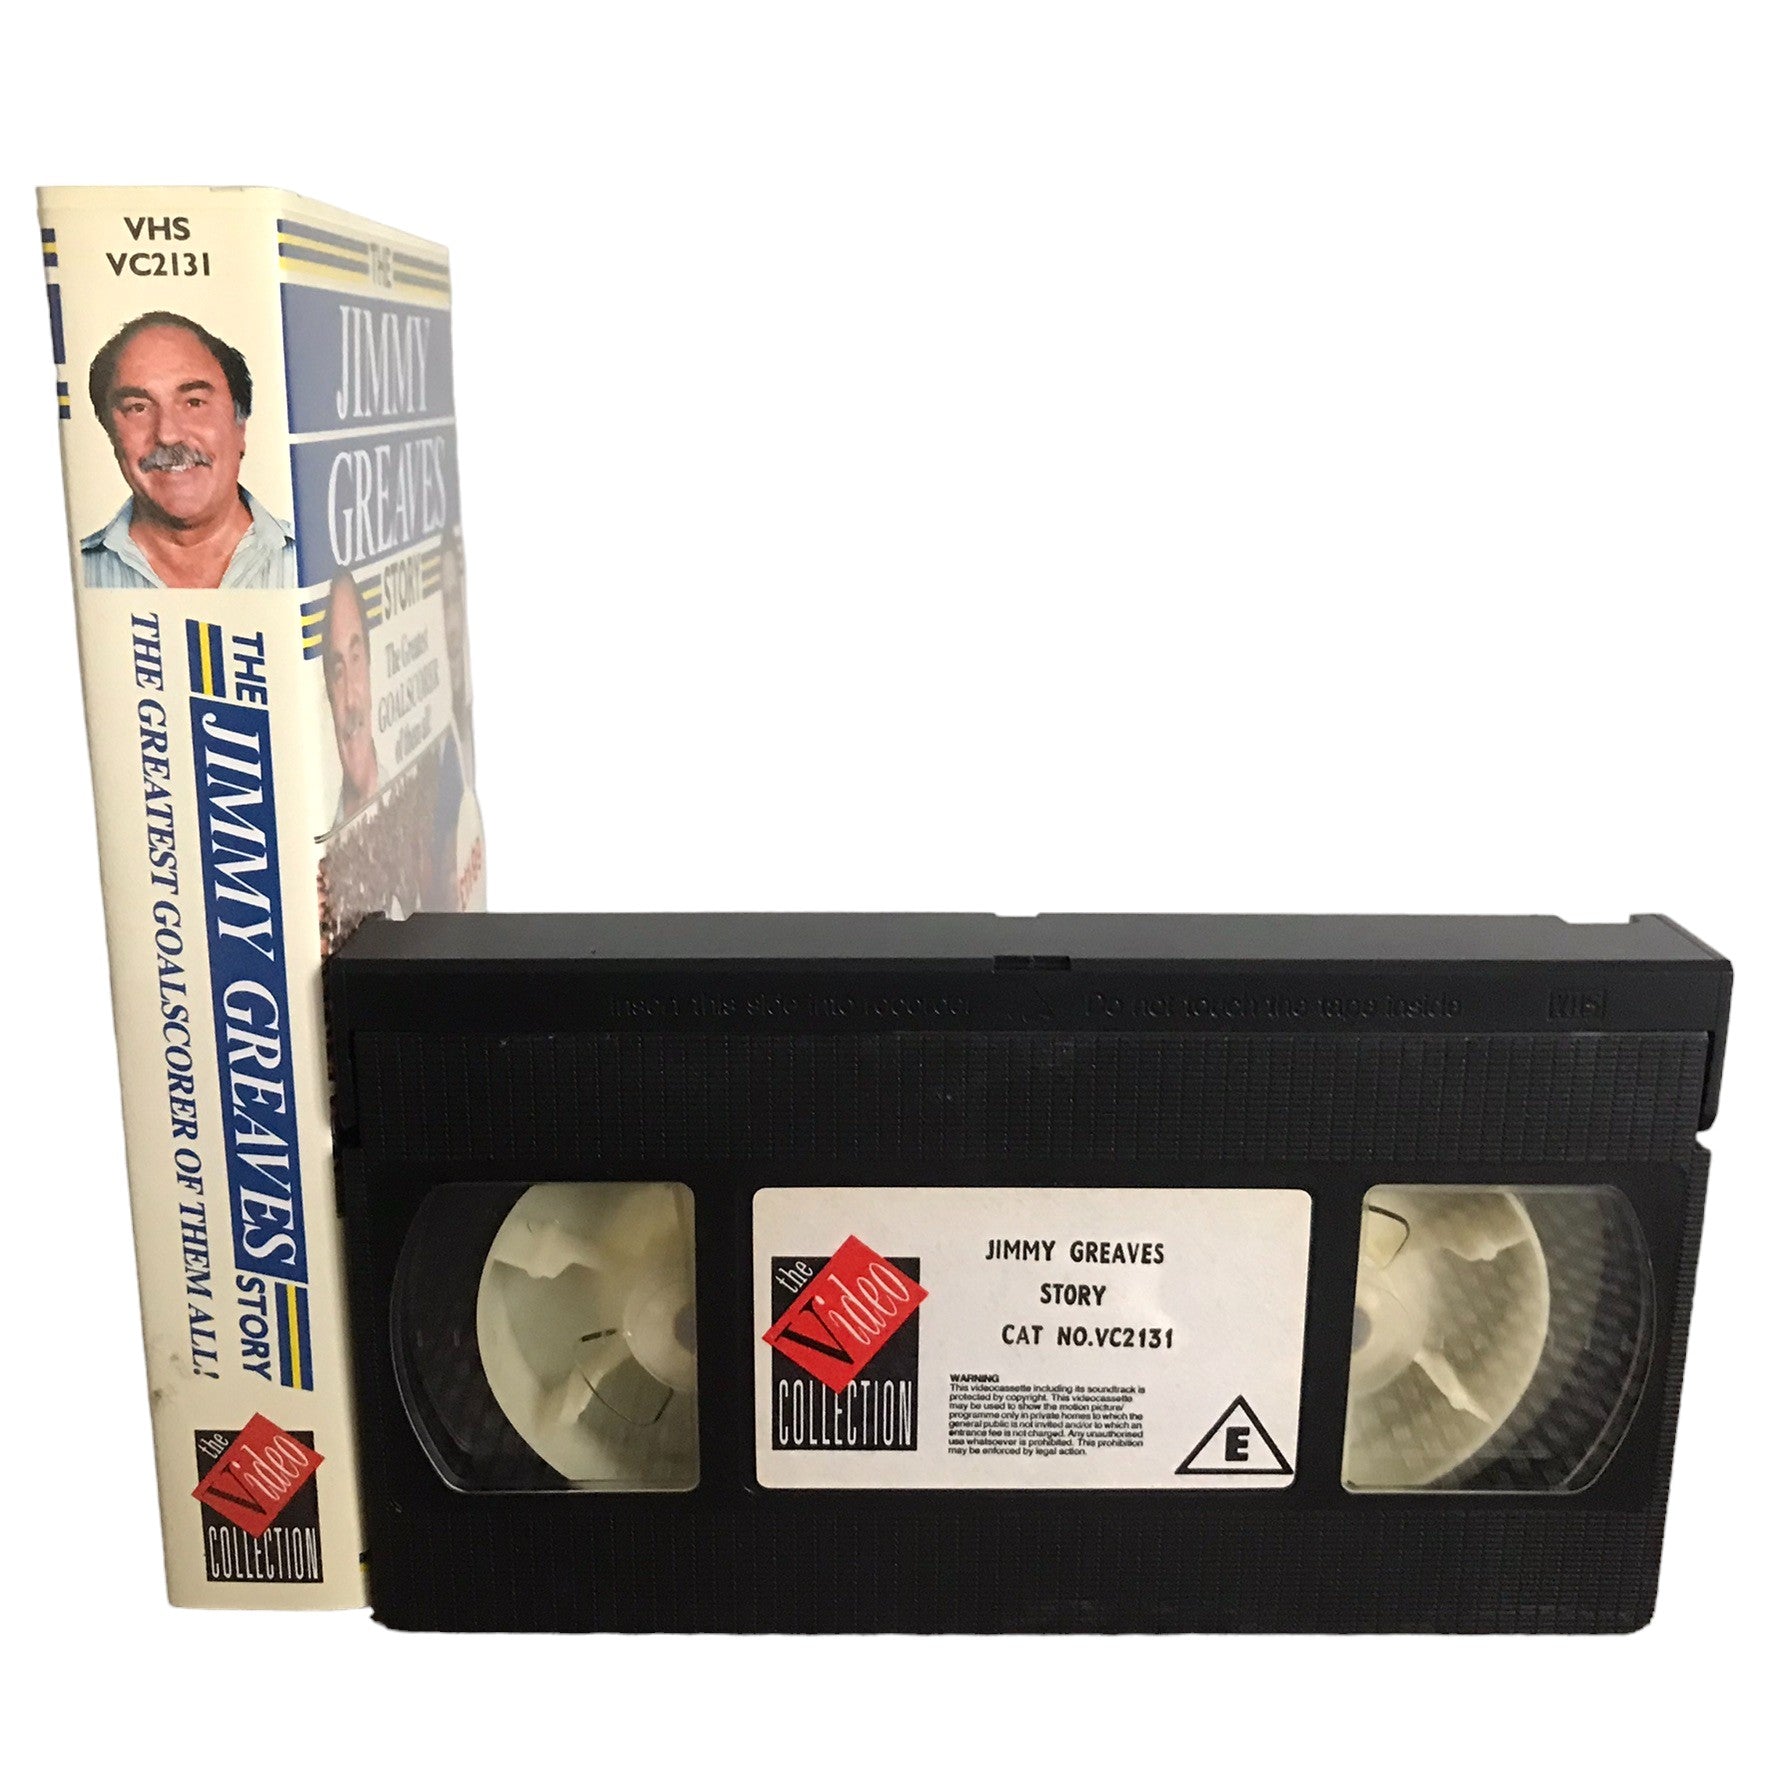 The Jimmy Greaves - The Greatest Goalscorer of Them All! - Jimmy Greaves - The Video Collection - Sports - Pal - VHS-